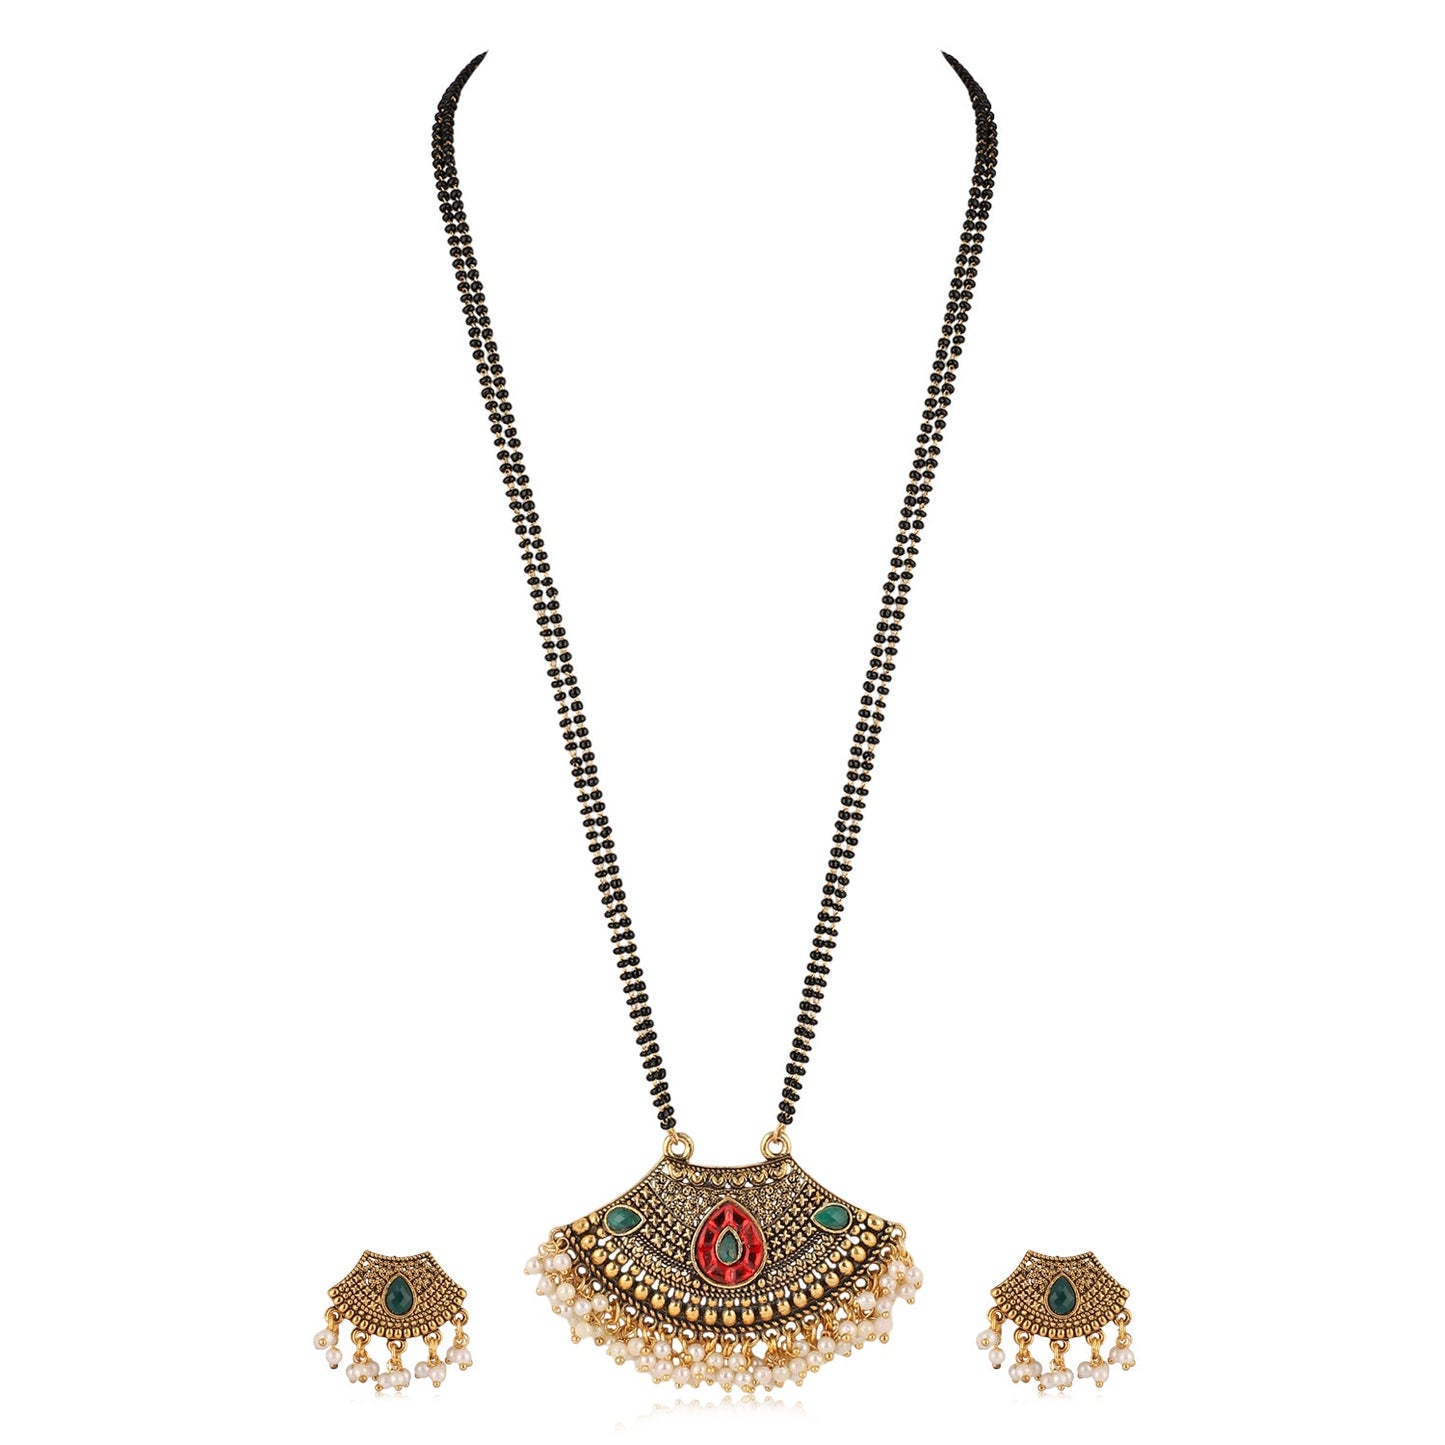 Mekkna Women's Pride Traditional Gold Plated Mangalsutra with Earrings | Buy This Jewellery Online from Mekkna.